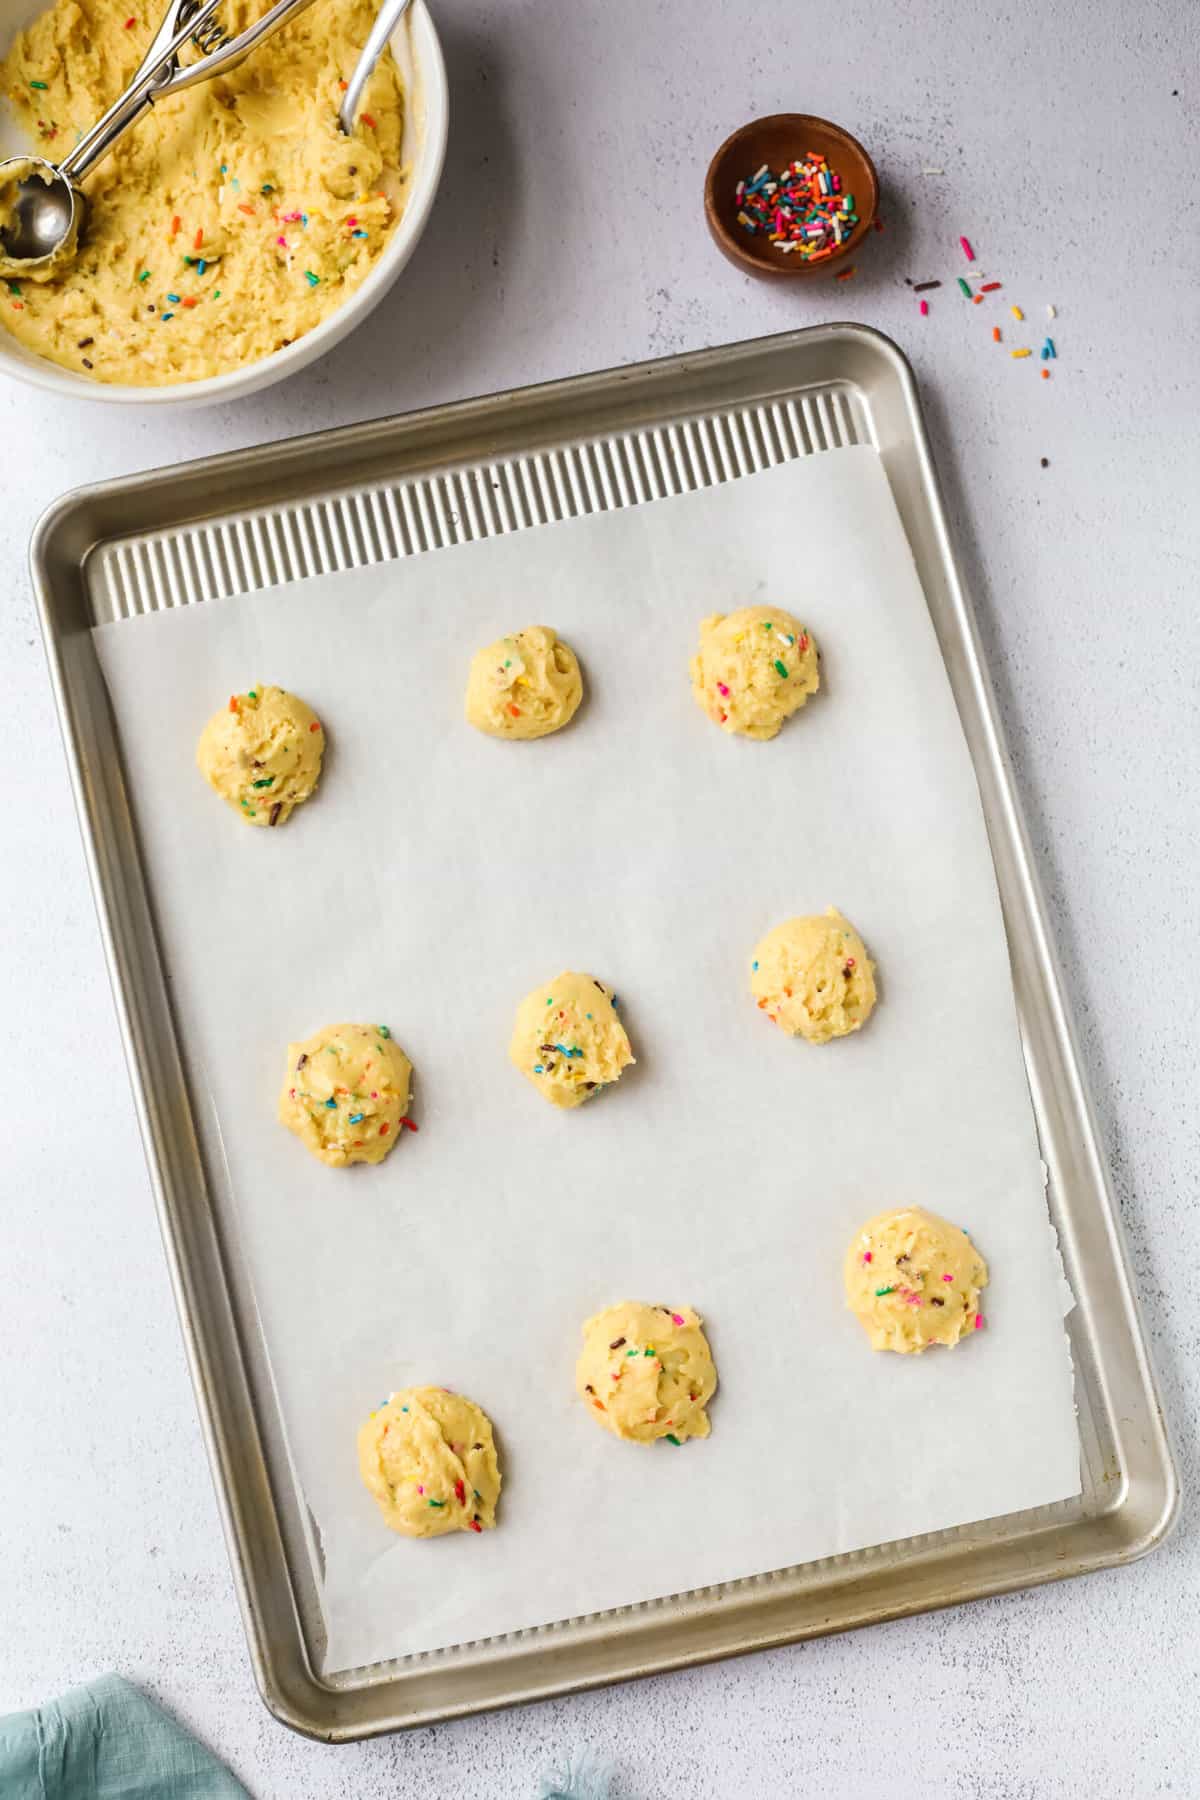 Drop tablespoons of cookie dough onto the baking sheet.